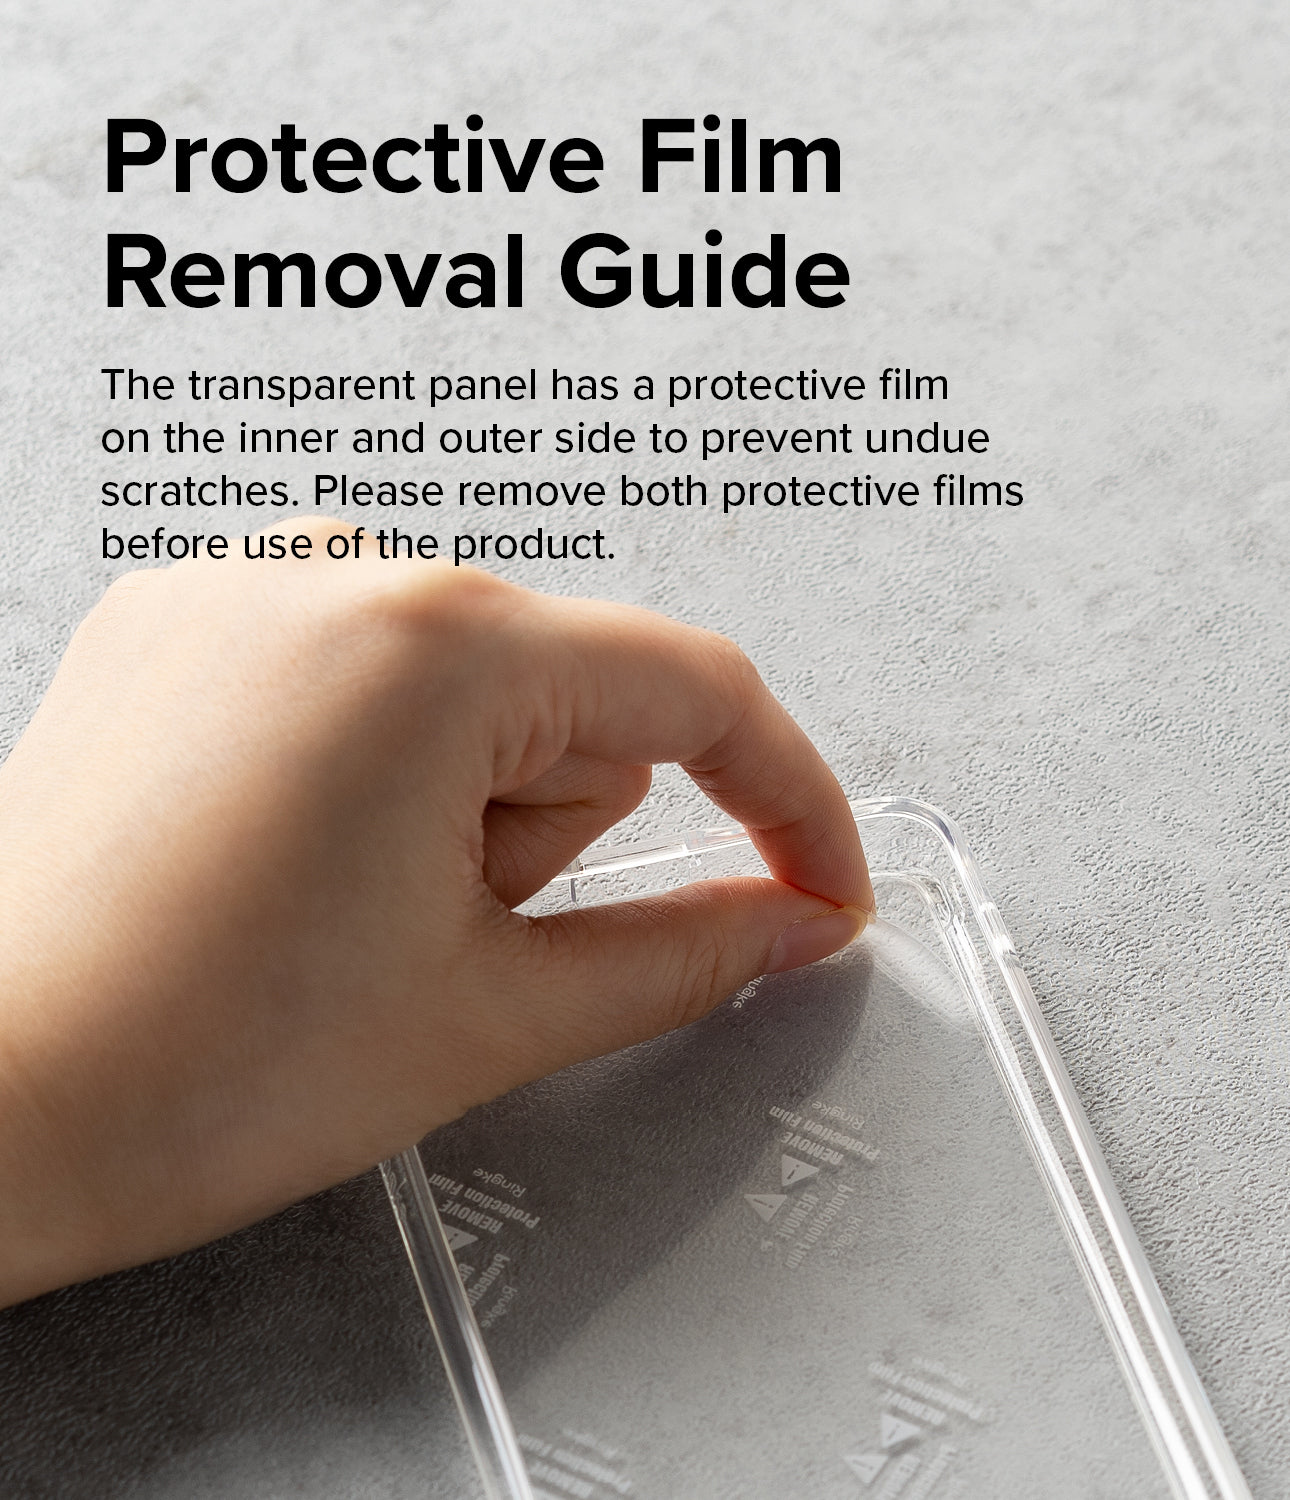 iPhone 14 Pro Max Case | Fusion - Protective Film Removal Guide. The transparent panel has a protective film on the inner and outer side to prevent undue scratches. Please remove both protective films before use of the product.